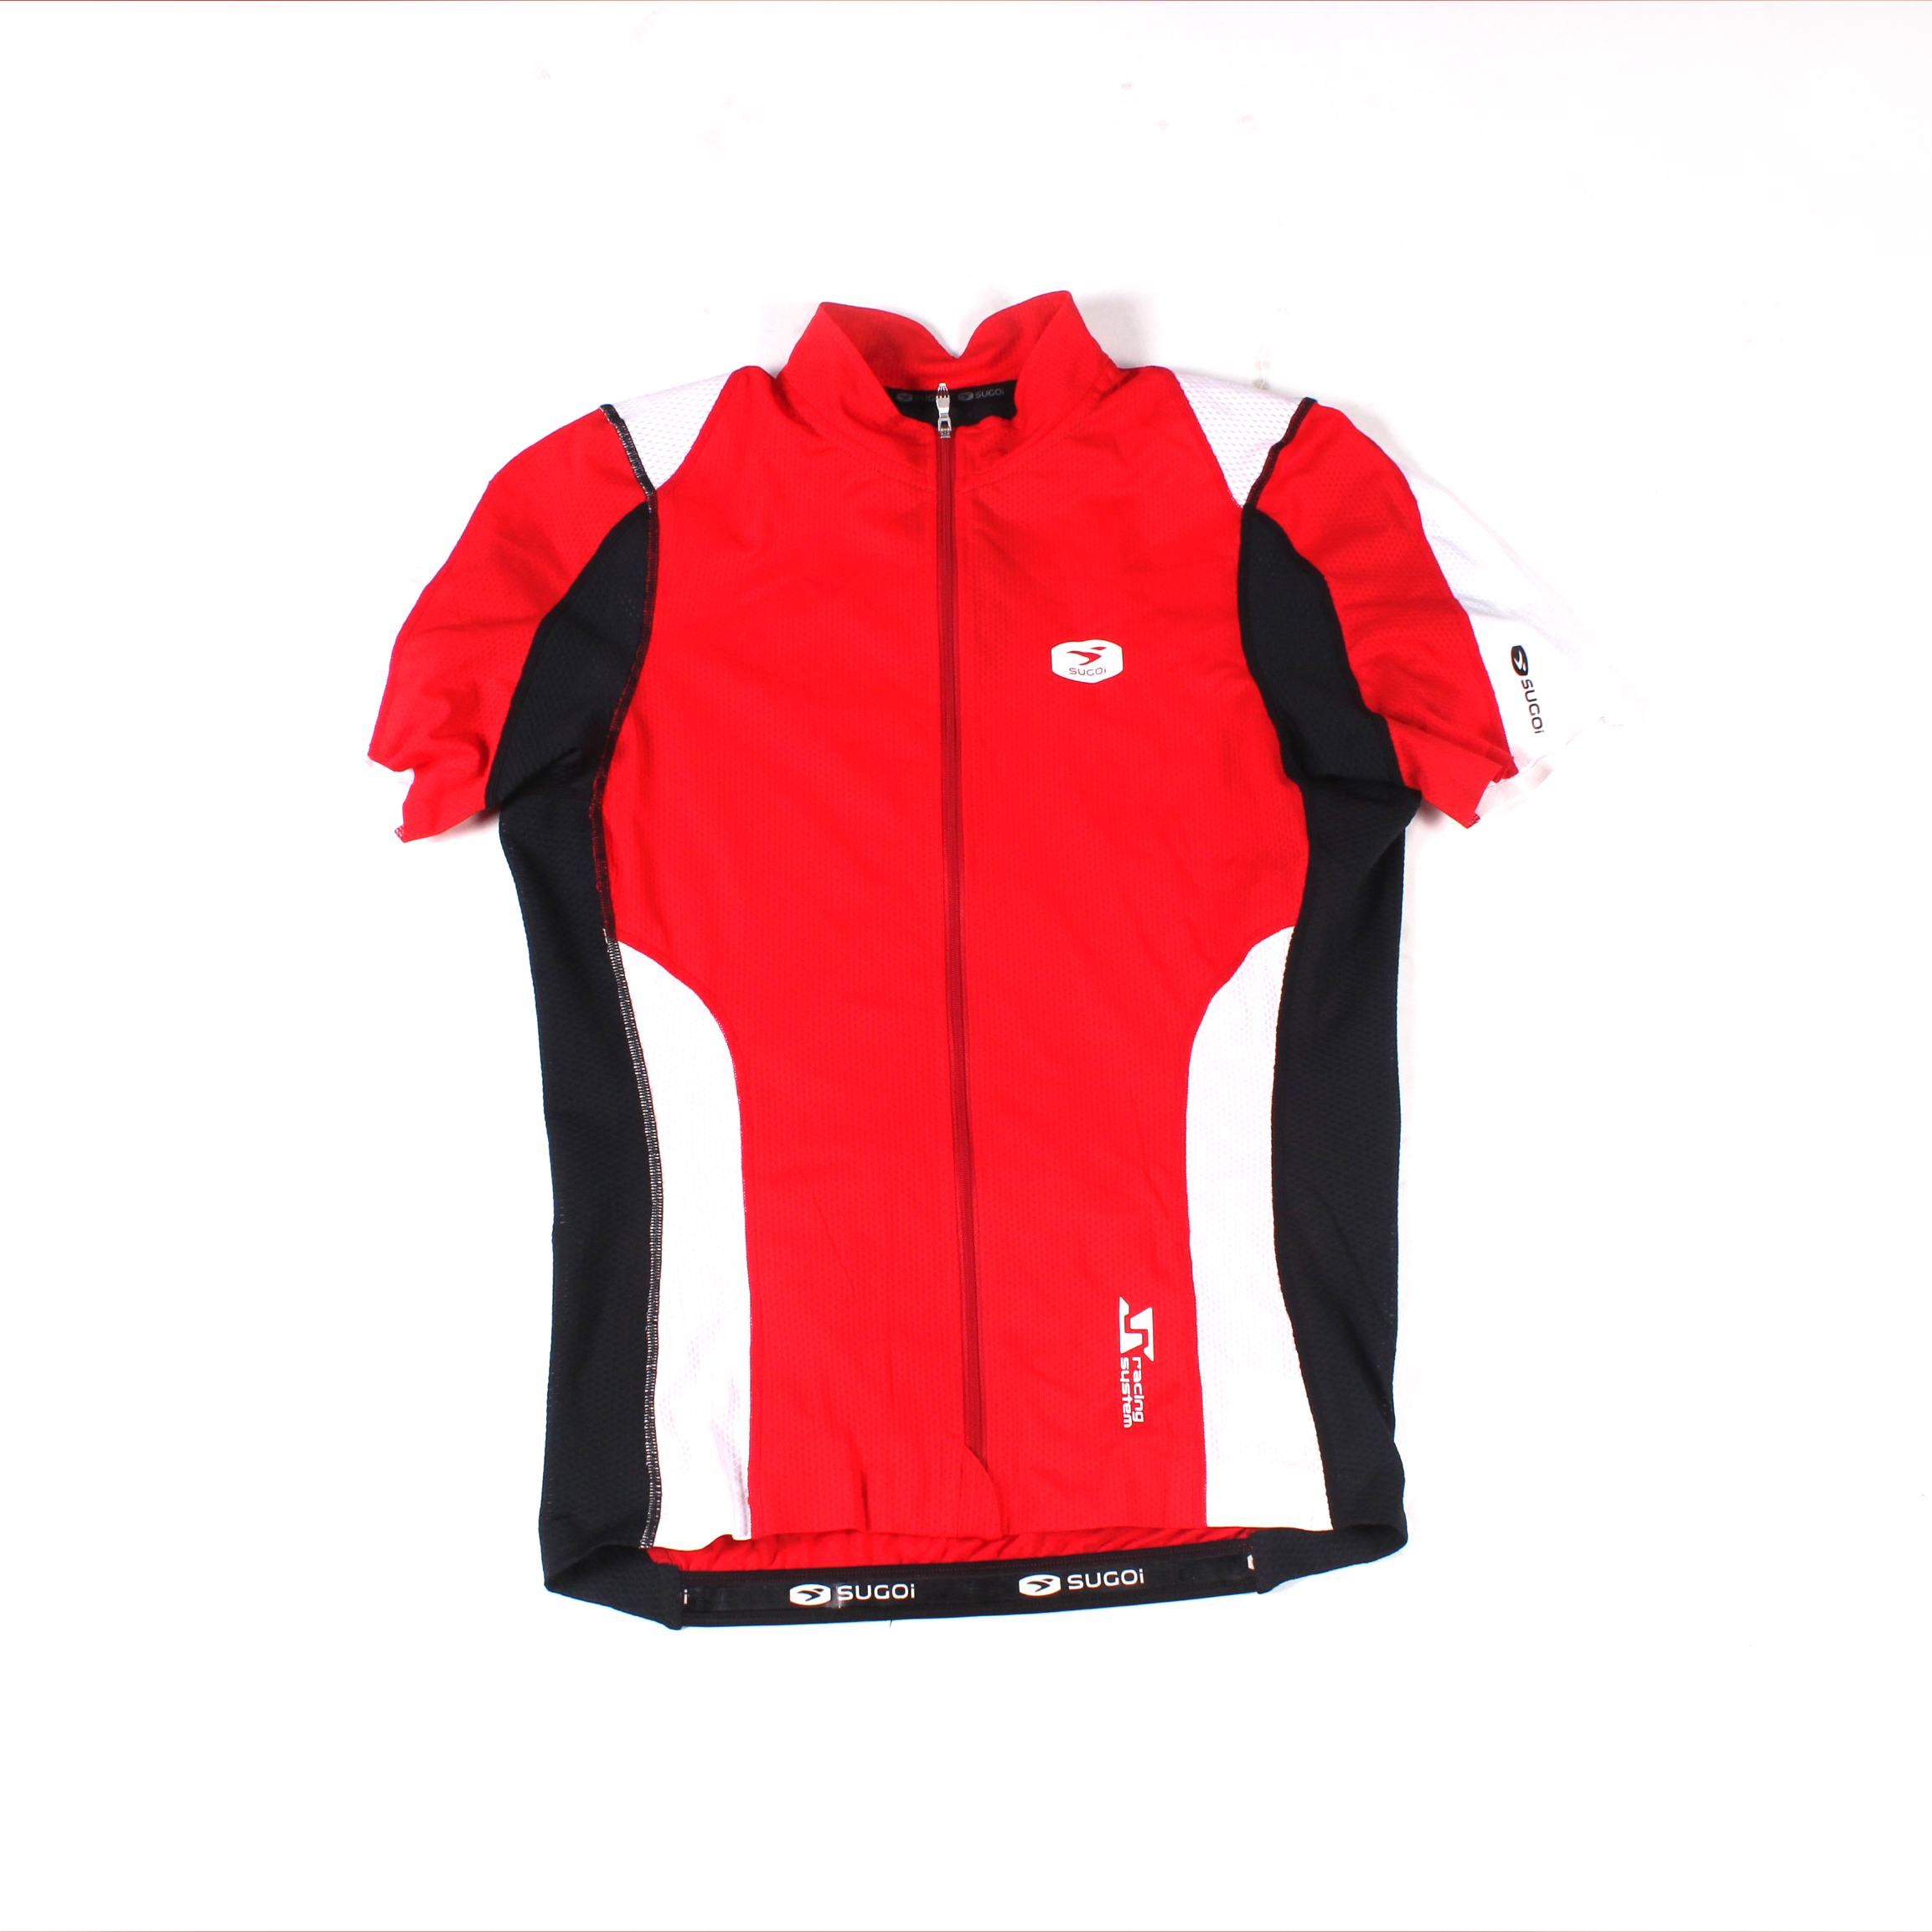 Sugoi Men's RS Jersey Chili Red Large